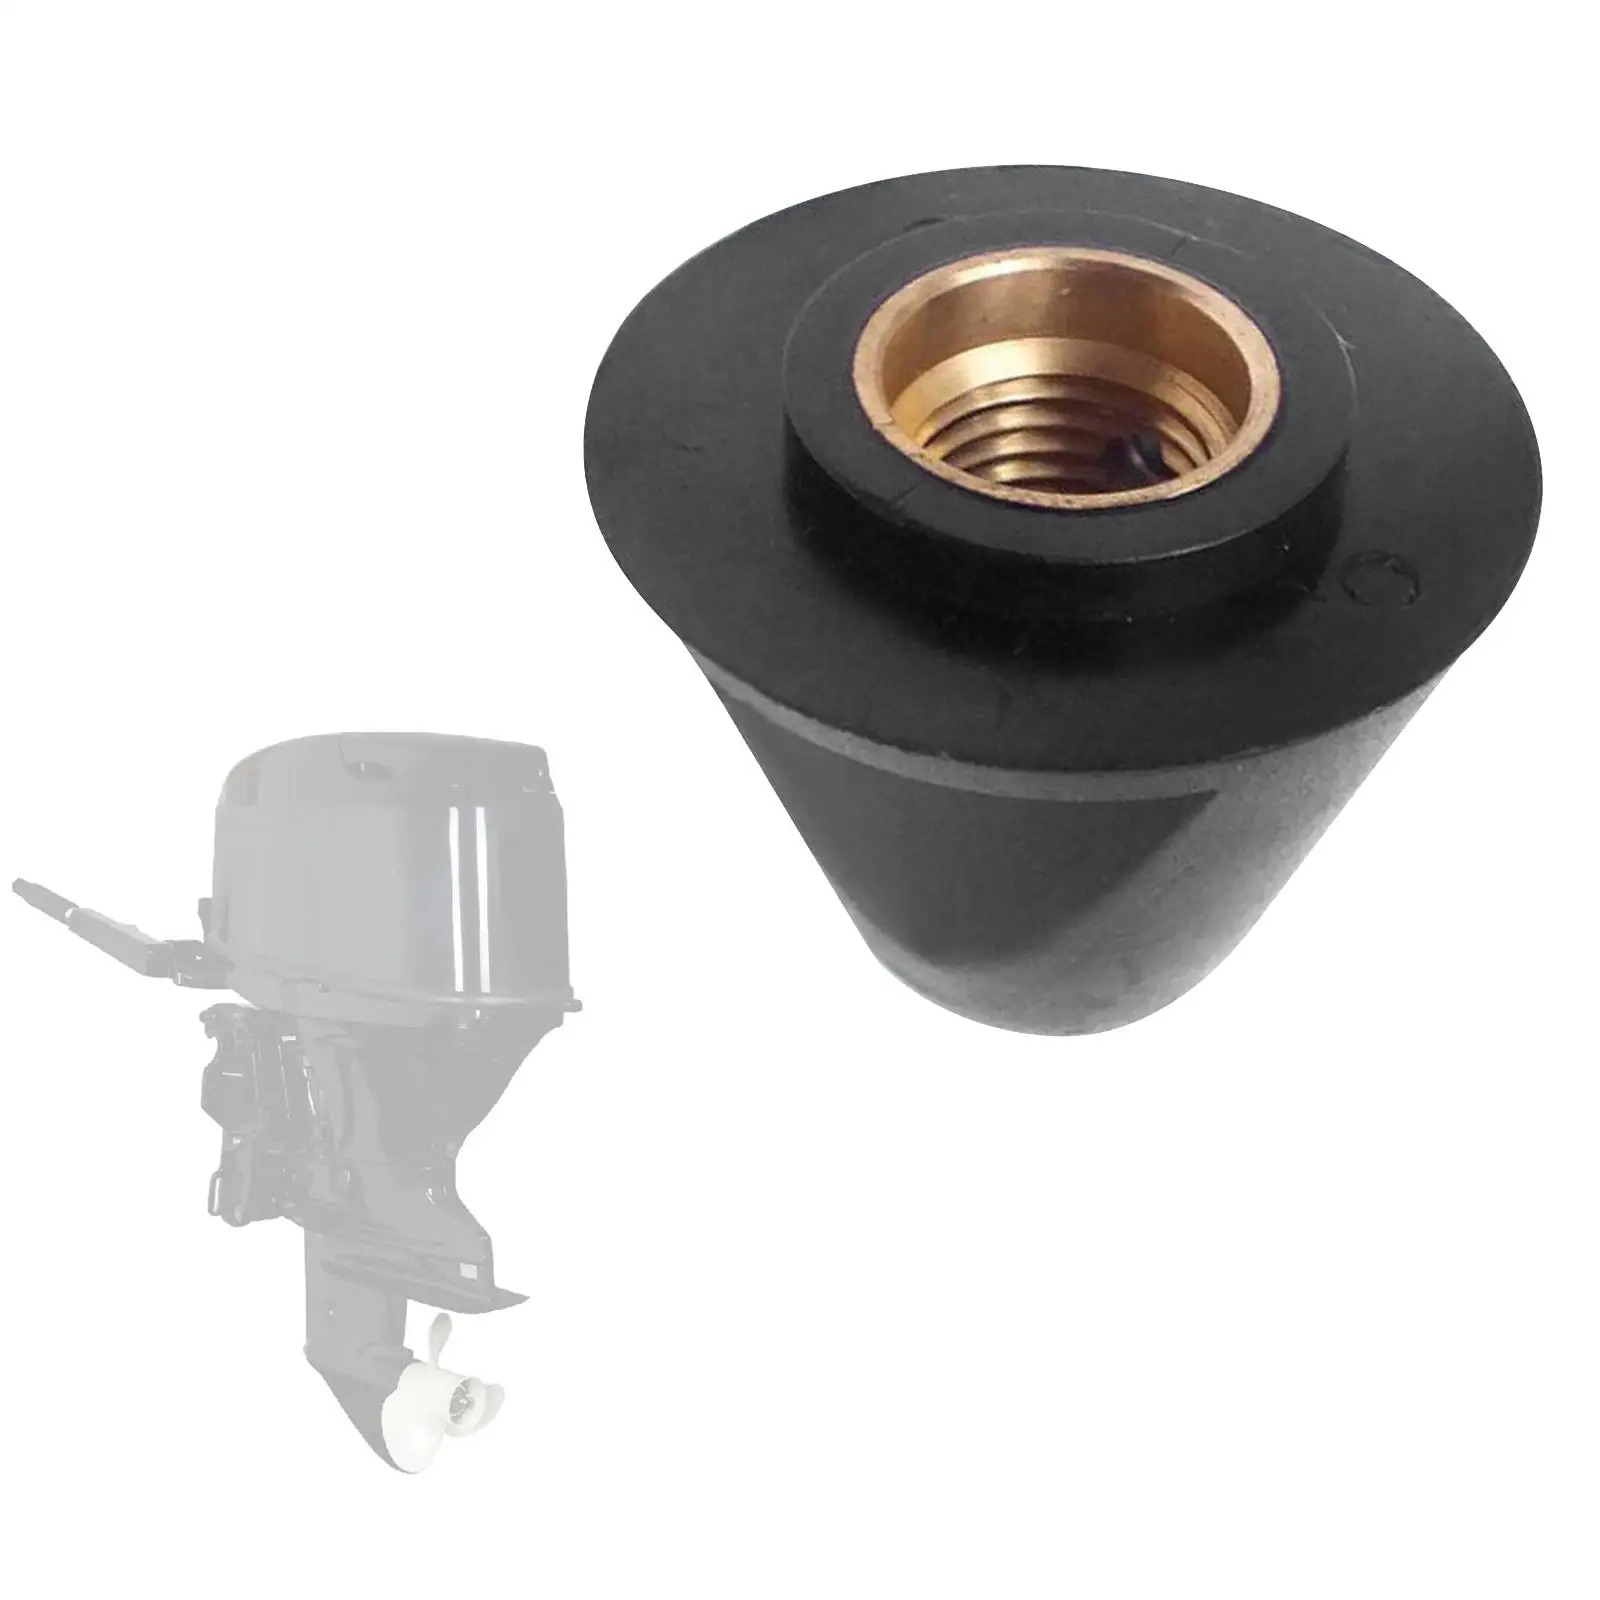 Propeller Prop Nut 647-45616-02 for Yamaha Outboard Engine 4HP 5HP 2 Stroke